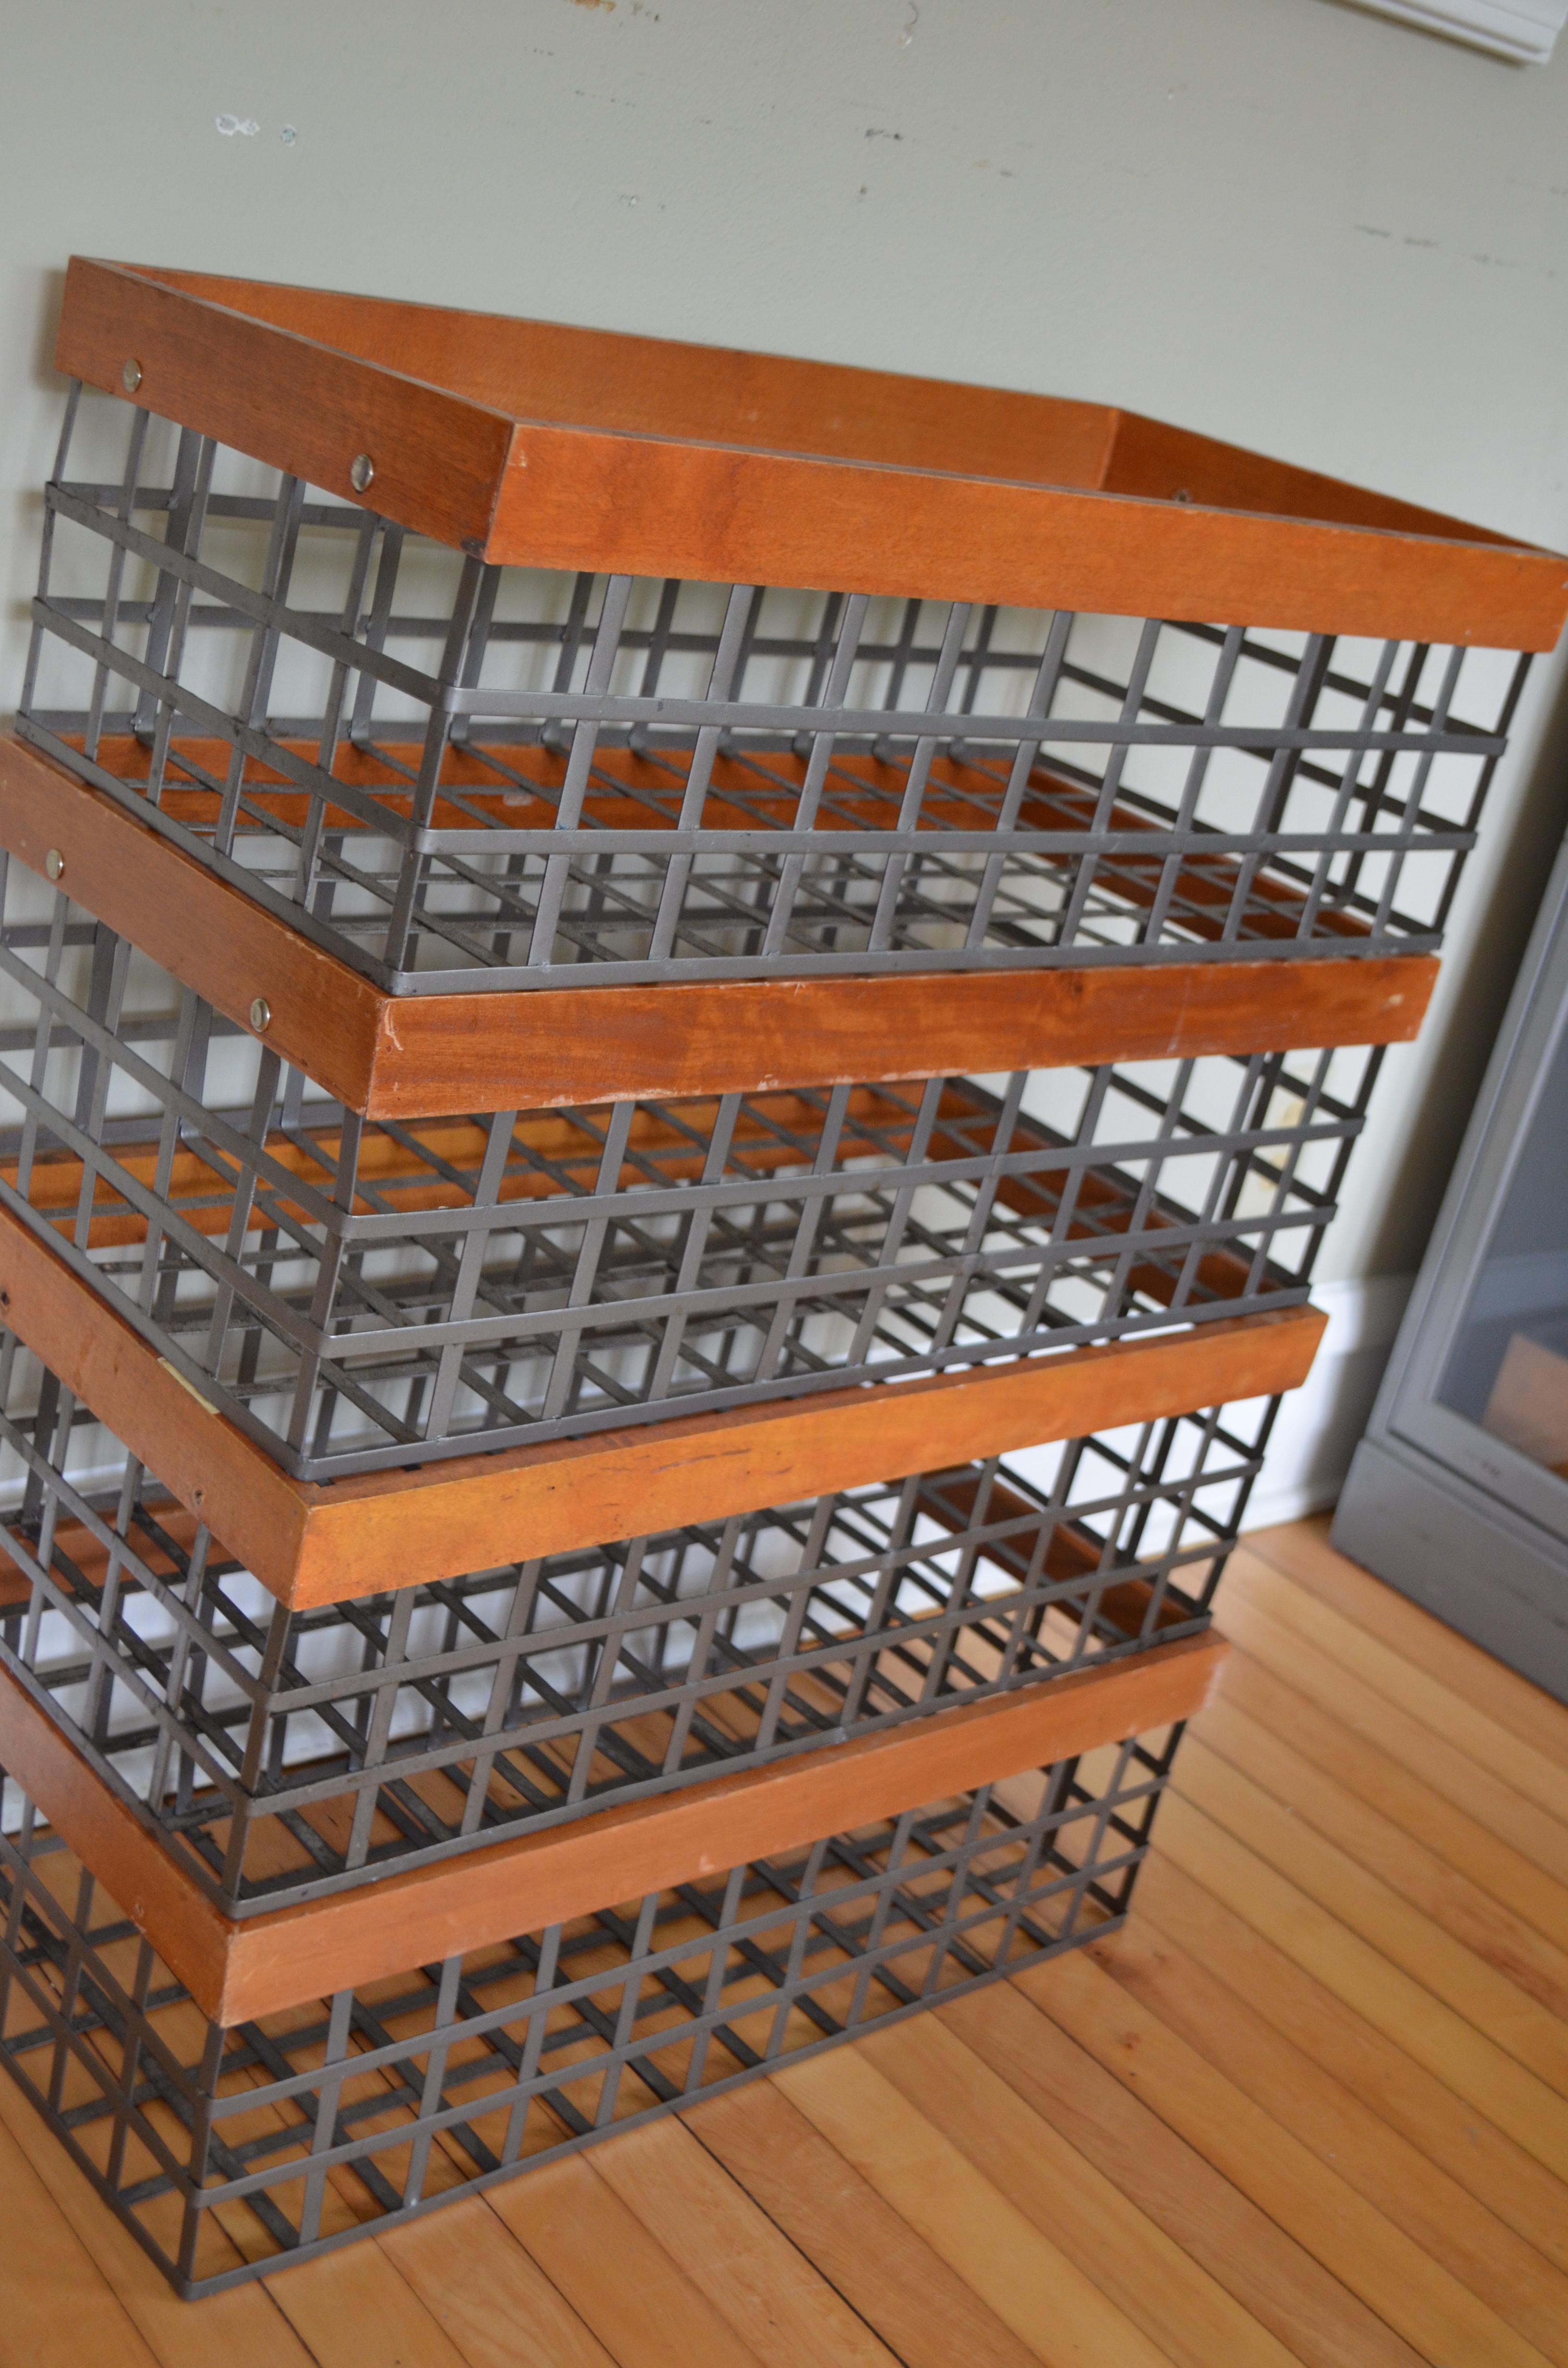 Classic organizational storage bins / baskets, these were originally used to hold and display produce in the local grocery store of yesteryear. Steel strapping with wood trim. Put them to use to store your towels, boots, toys, wine, books, plants or